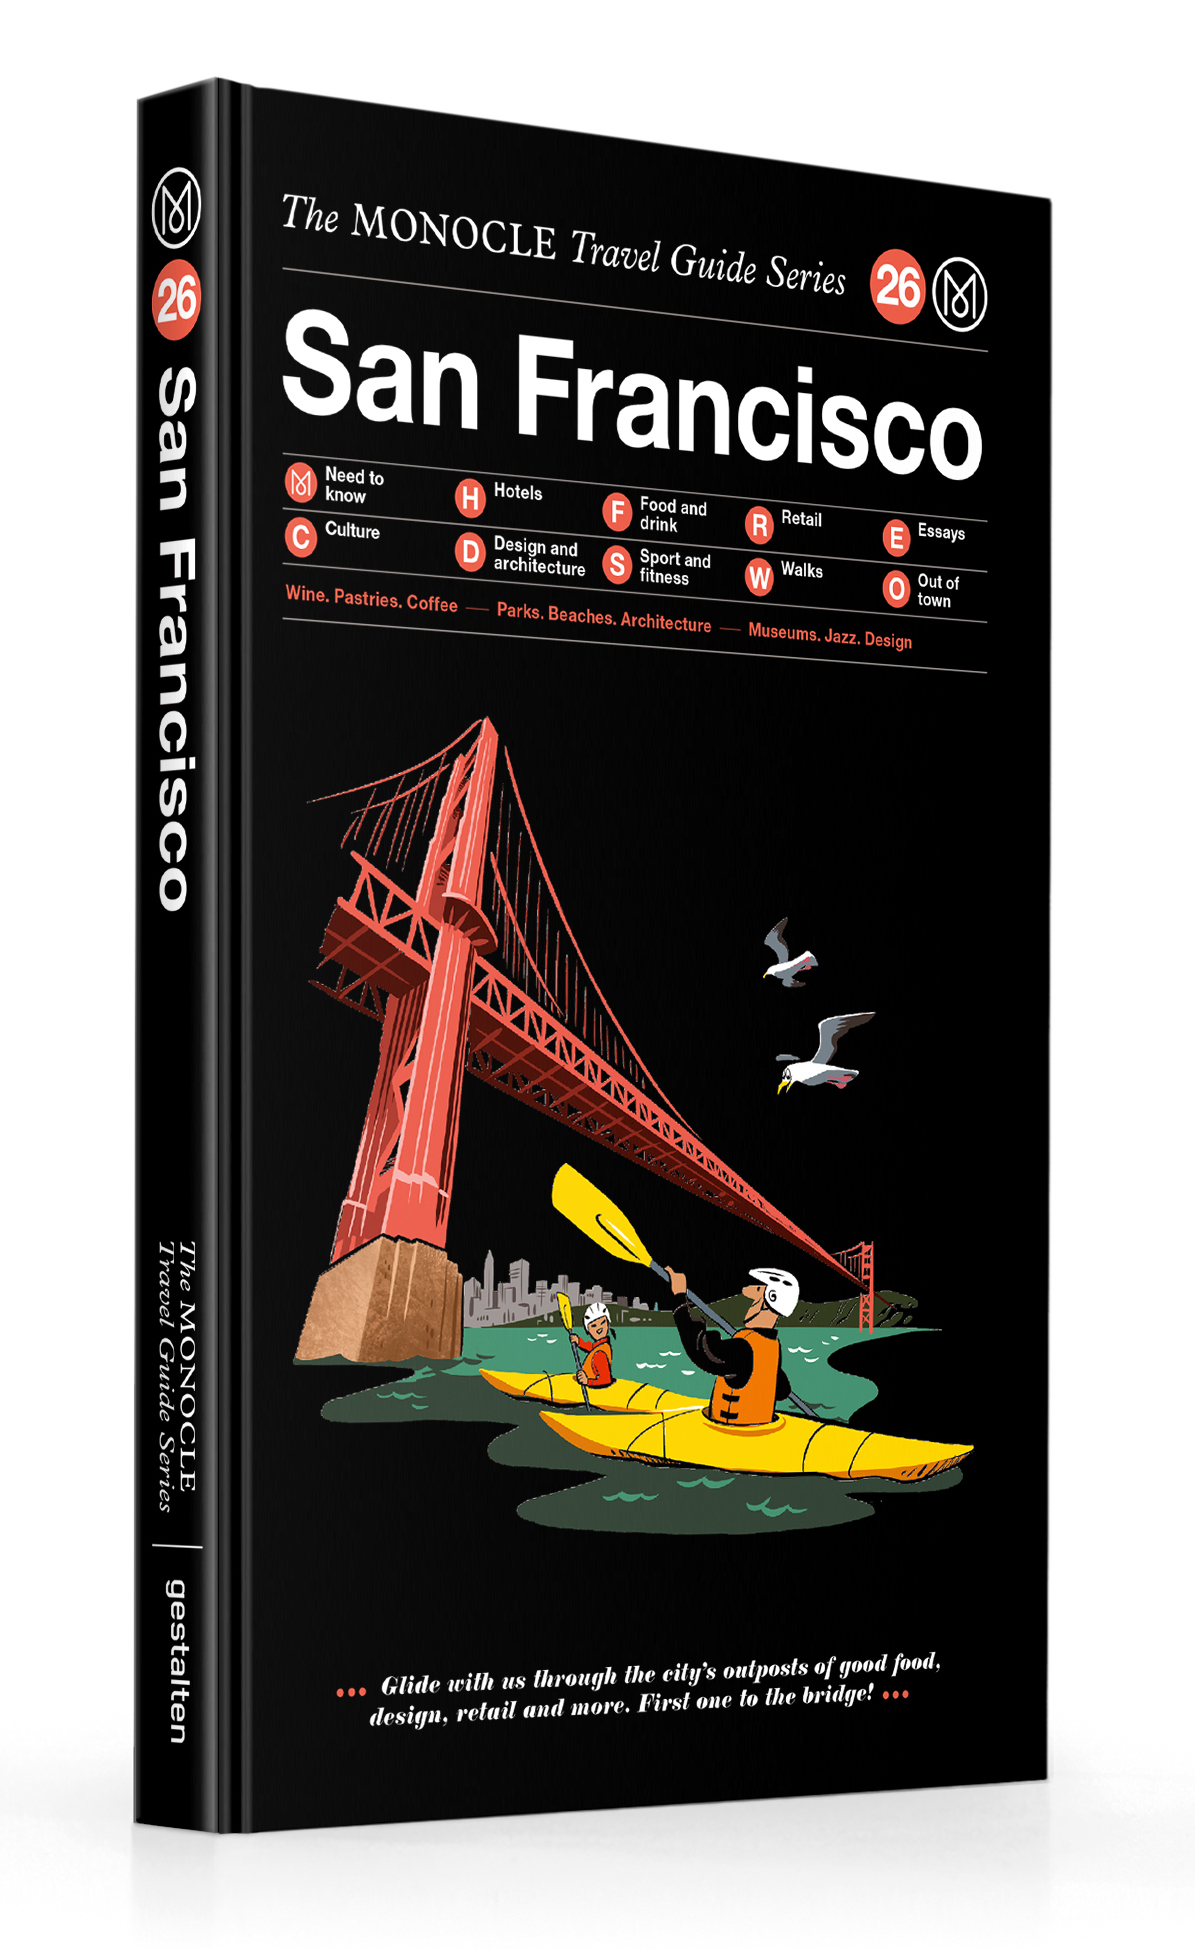 The Monocle Travel Guide Series – San Francisco